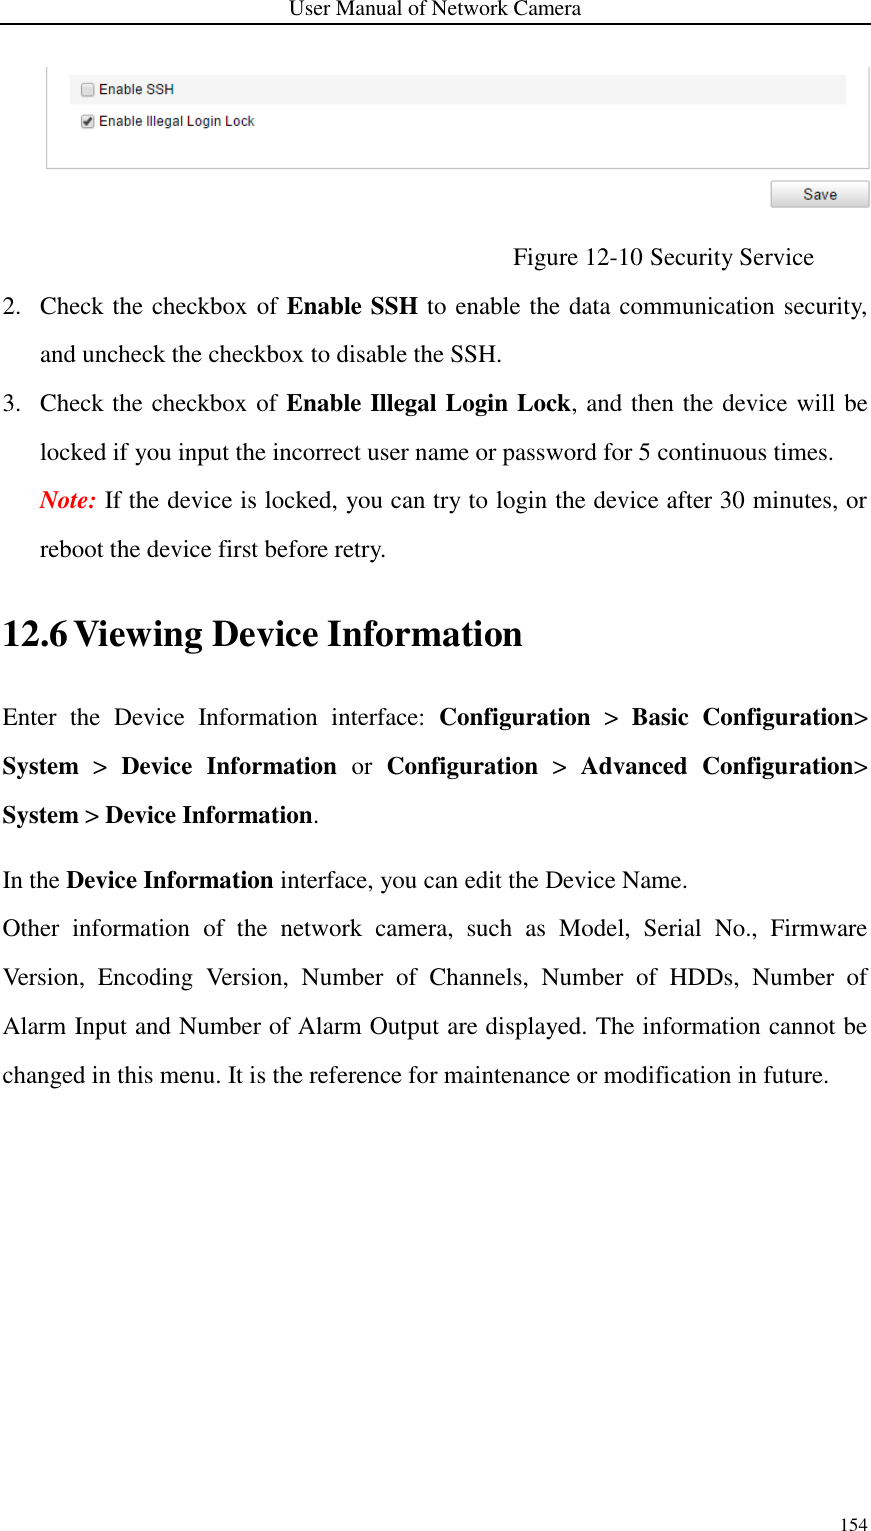 User Manual of Network Camera 154   Figure 12-10 Security Service 2. Check the checkbox of Enable SSH to enable the data communication security, and uncheck the checkbox to disable the SSH.   3. Check the checkbox of Enable Illegal Login Lock, and then the device will be locked if you input the incorrect user name or password for 5 continuous times. Note: If the device is locked, you can try to login the device after 30 minutes, or reboot the device first before retry. 12.6 Viewing Device Information Enter  the  Device  Information  interface:  Configuration &gt;  Basic  Configuration&gt; System  &gt;  Device  Information  or  Configuration &gt;  Advanced  Configuration&gt; System &gt; Device Information. In the Device Information interface, you can edit the Device Name. Other  information  of  the  network  camera,  such  as  Model,  Serial  No.,  Firmware Version,  Encoding  Version,  Number  of  Channels,  Number  of  HDDs,  Number  of Alarm Input and Number of Alarm Output are displayed. The information cannot be changed in this menu. It is the reference for maintenance or modification in future. 